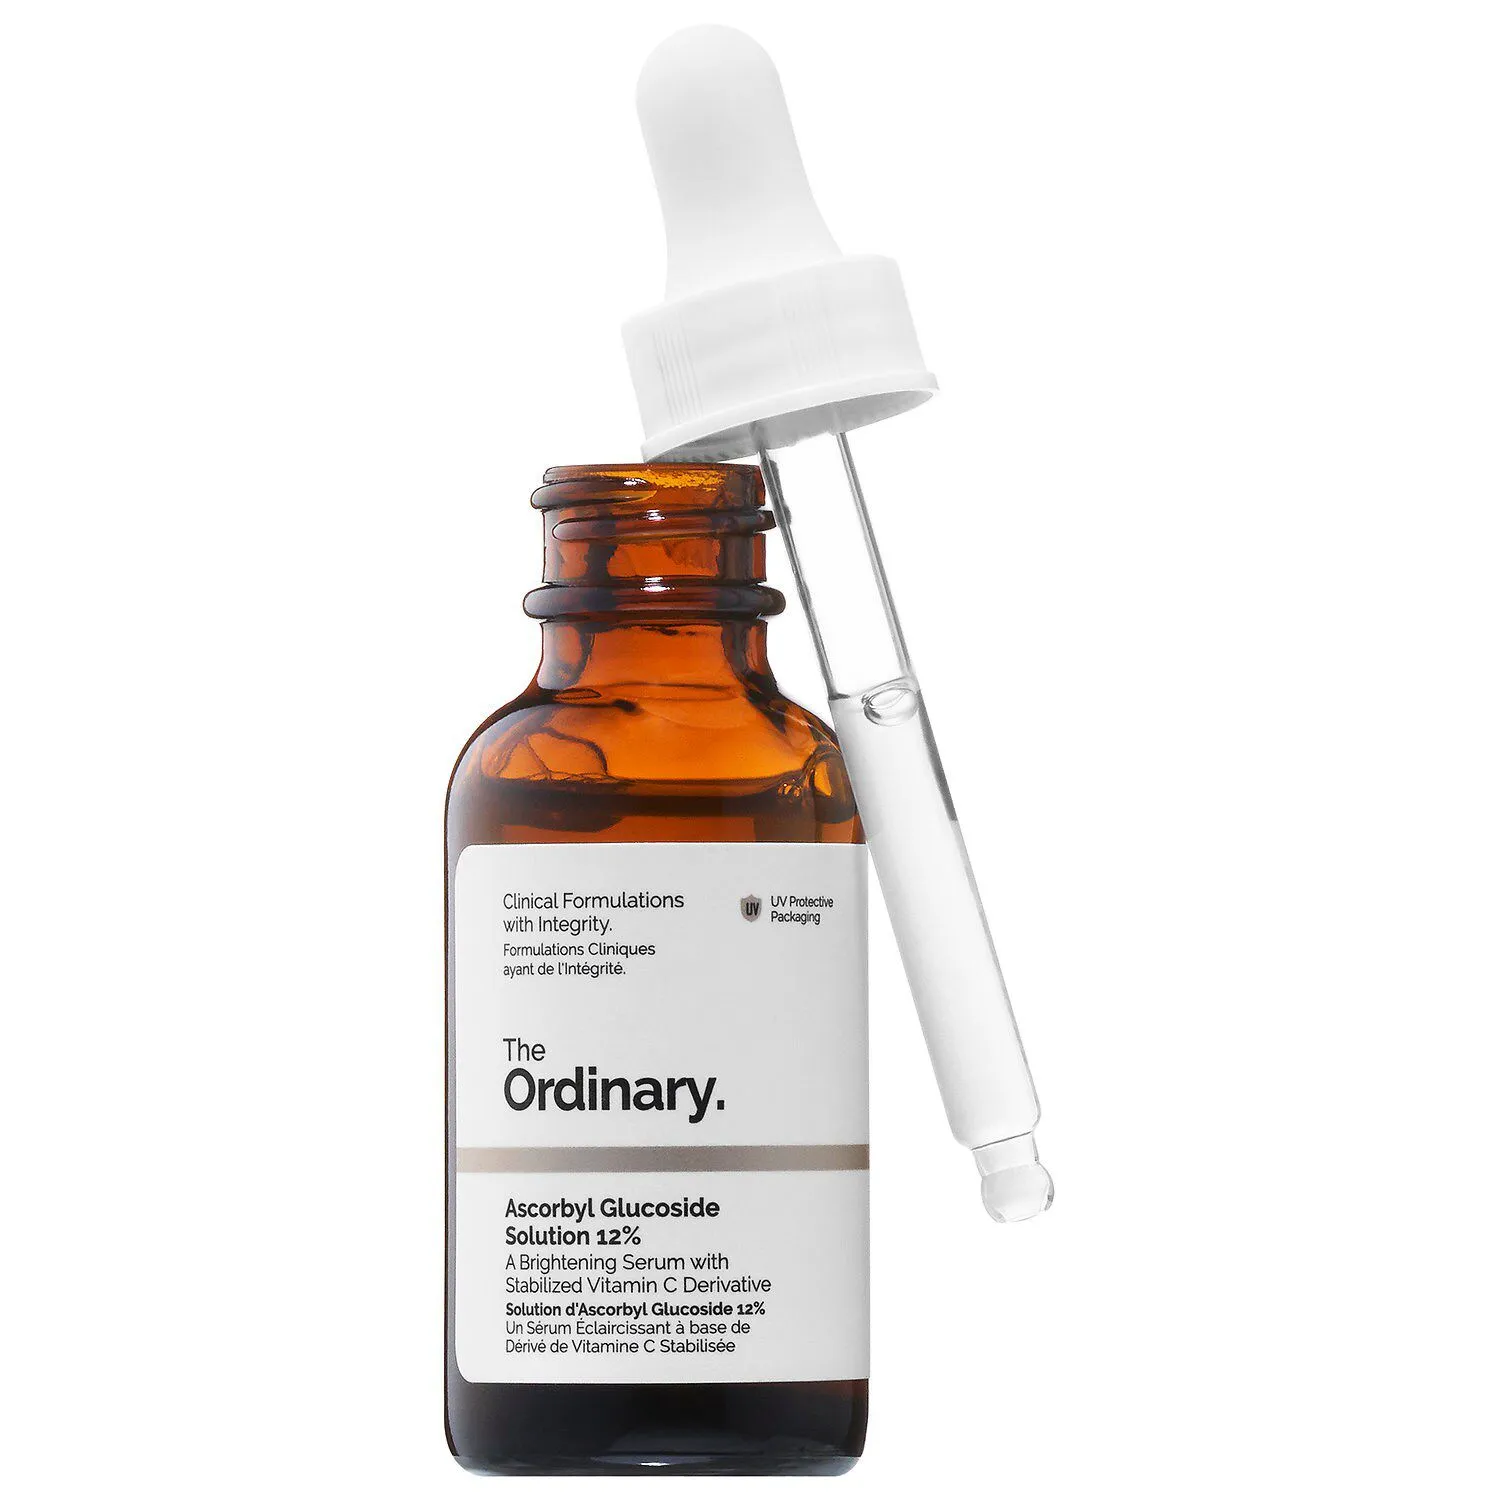 A close second in the The Ordinary vs SkinCeuticals CE Ferulic comparison, the The Ordinary’s Ascorbyl Glucoside Solution 12%